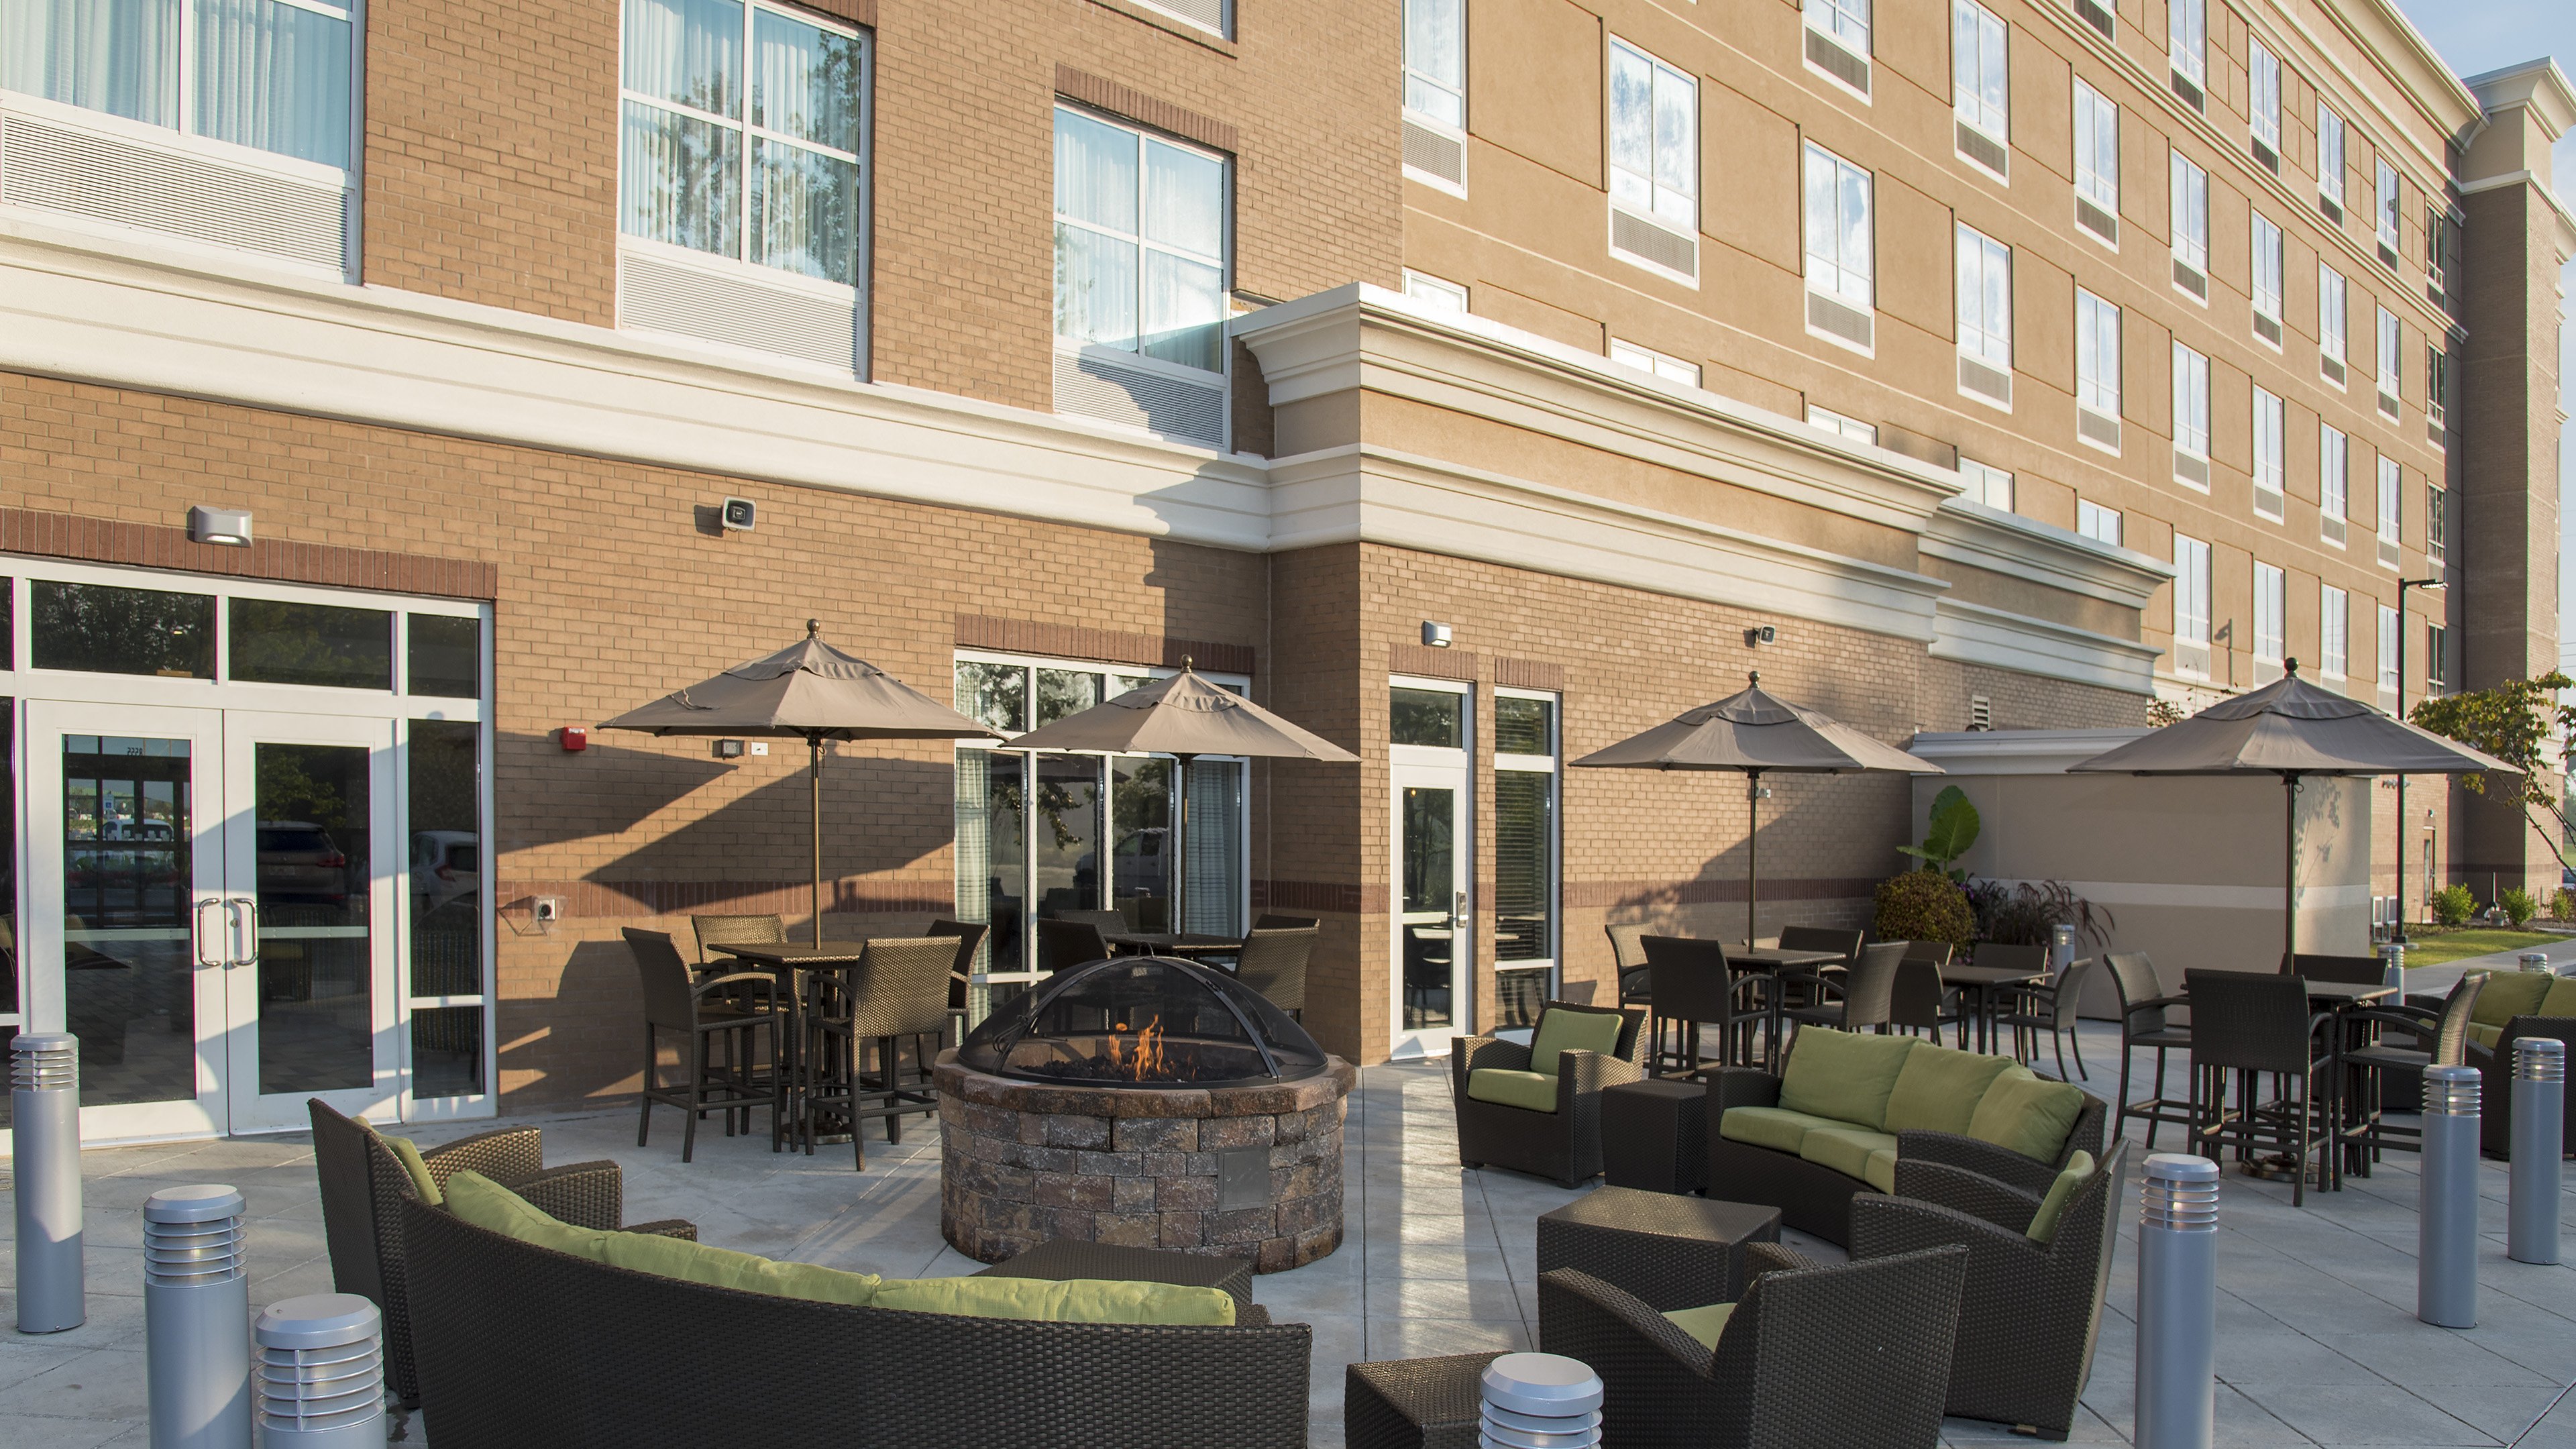 Unwind with great conversations, food and drinks on our patio.